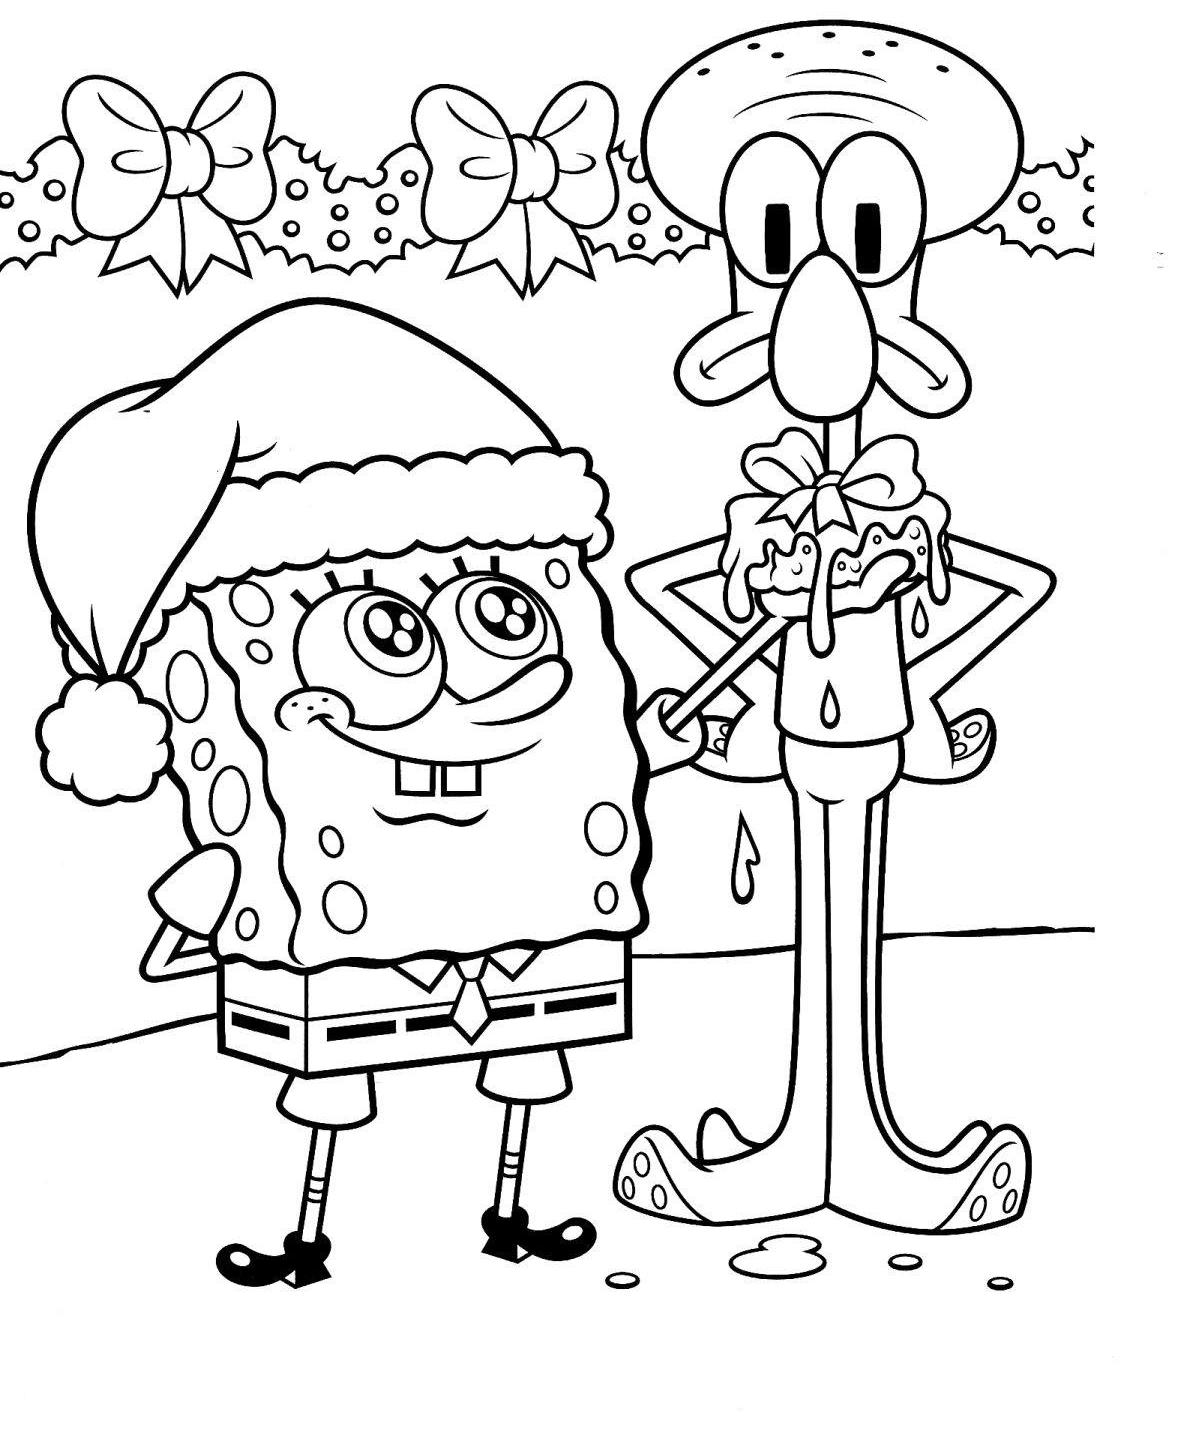 Spongebob Colouring Pages For Children Christmas Coloring Page